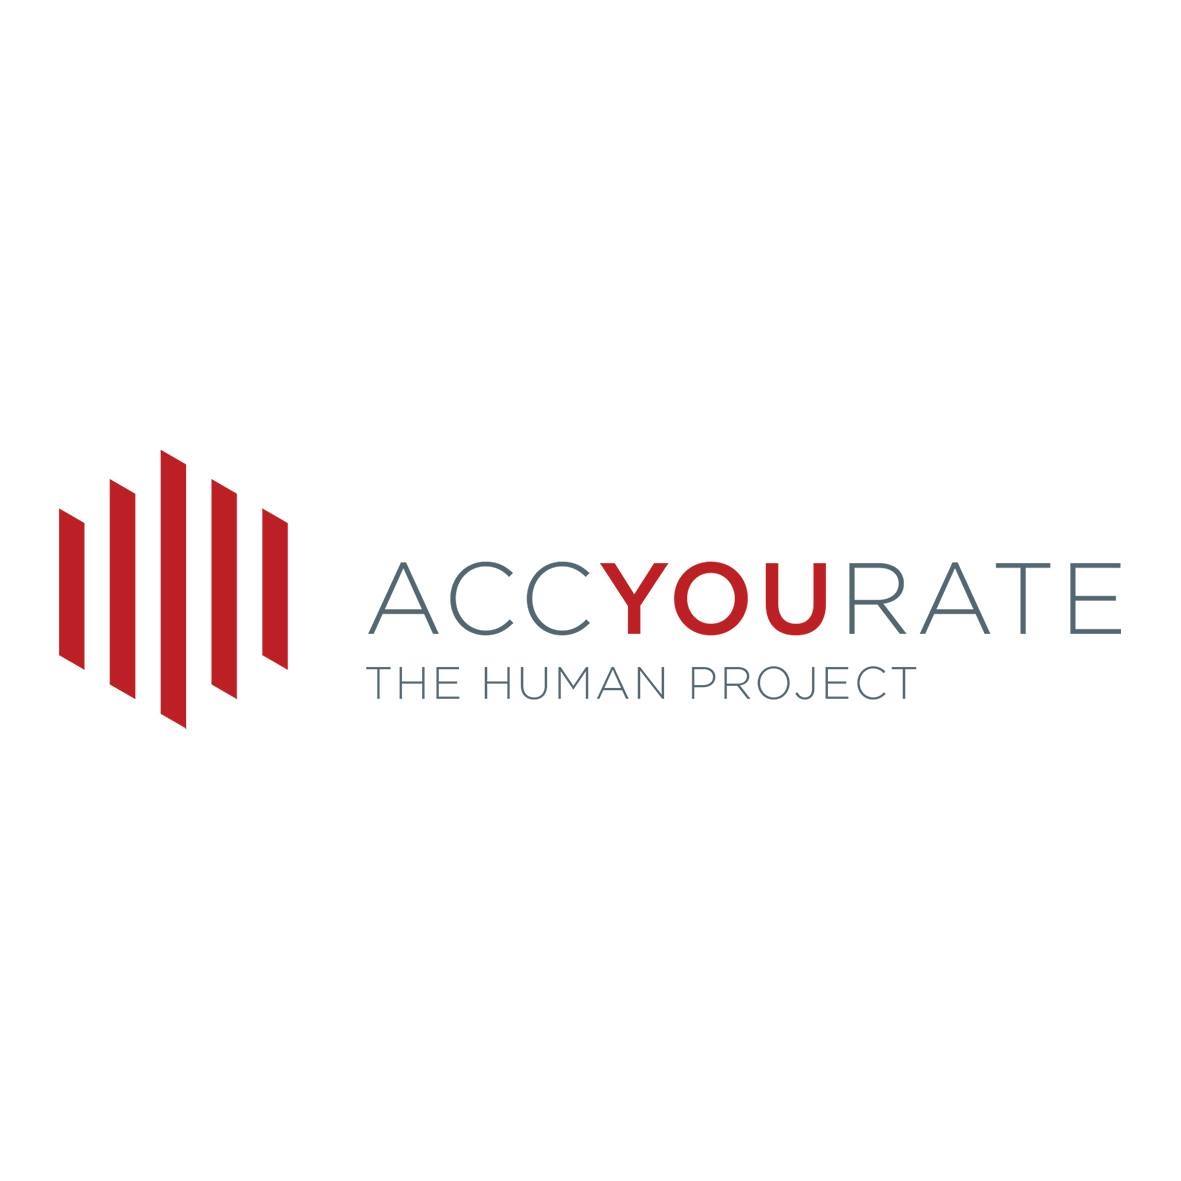 Accyourate